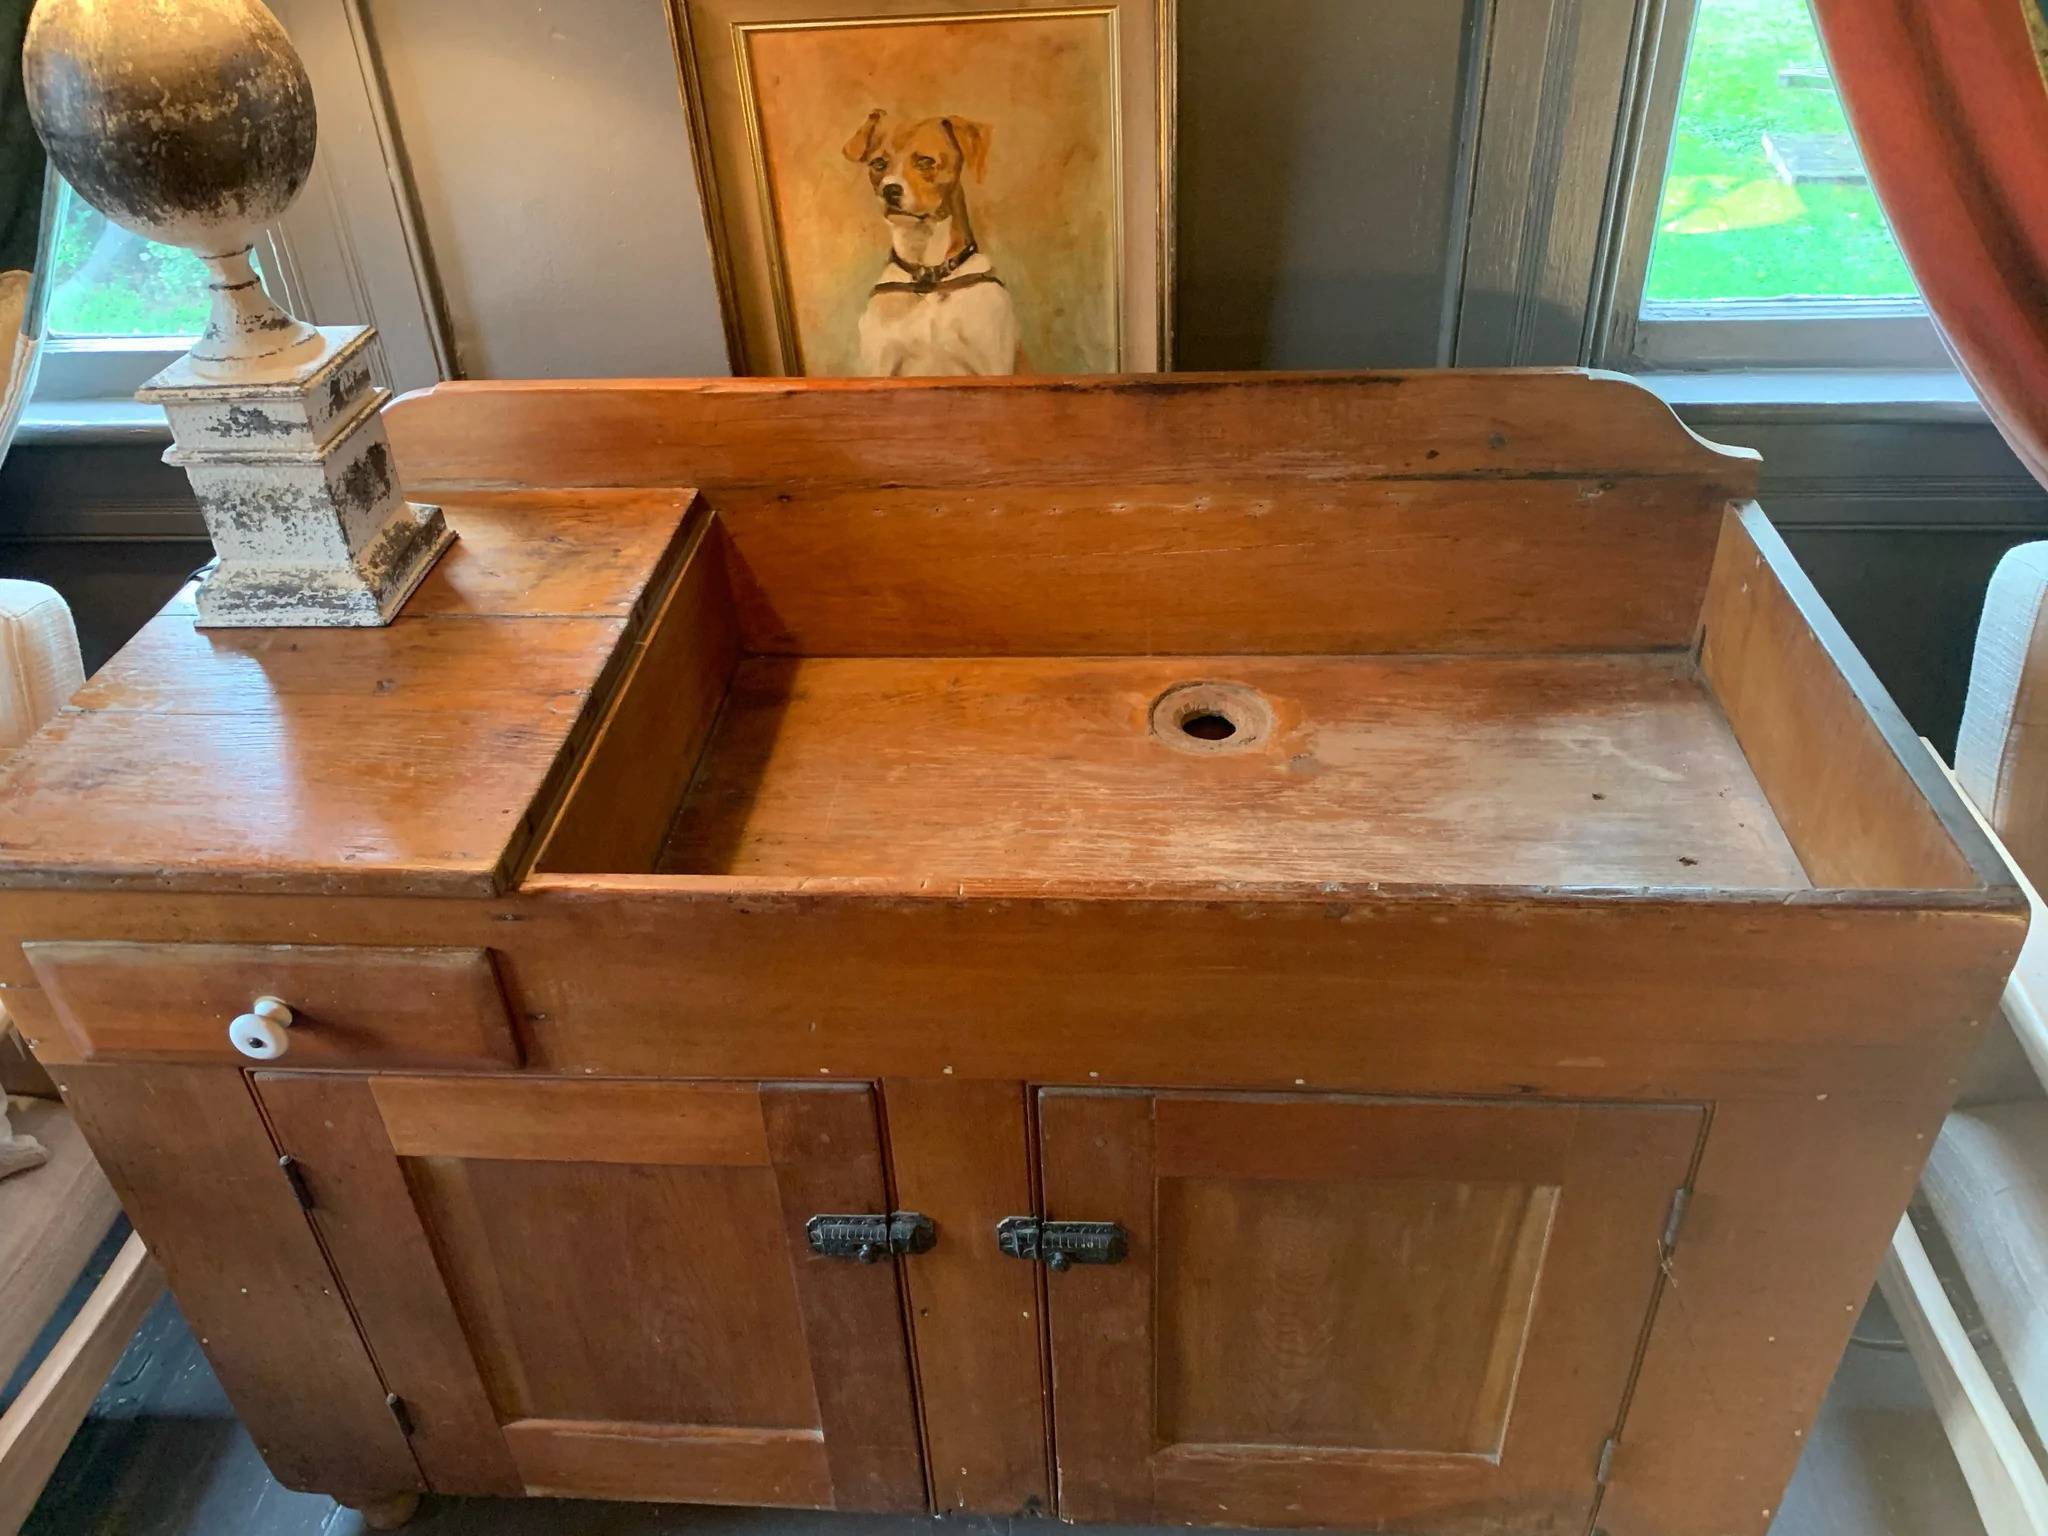 https://storables.com/wp-content/uploads/2023/09/what-is-a-dry-sink-used-for-1695945280.jpg